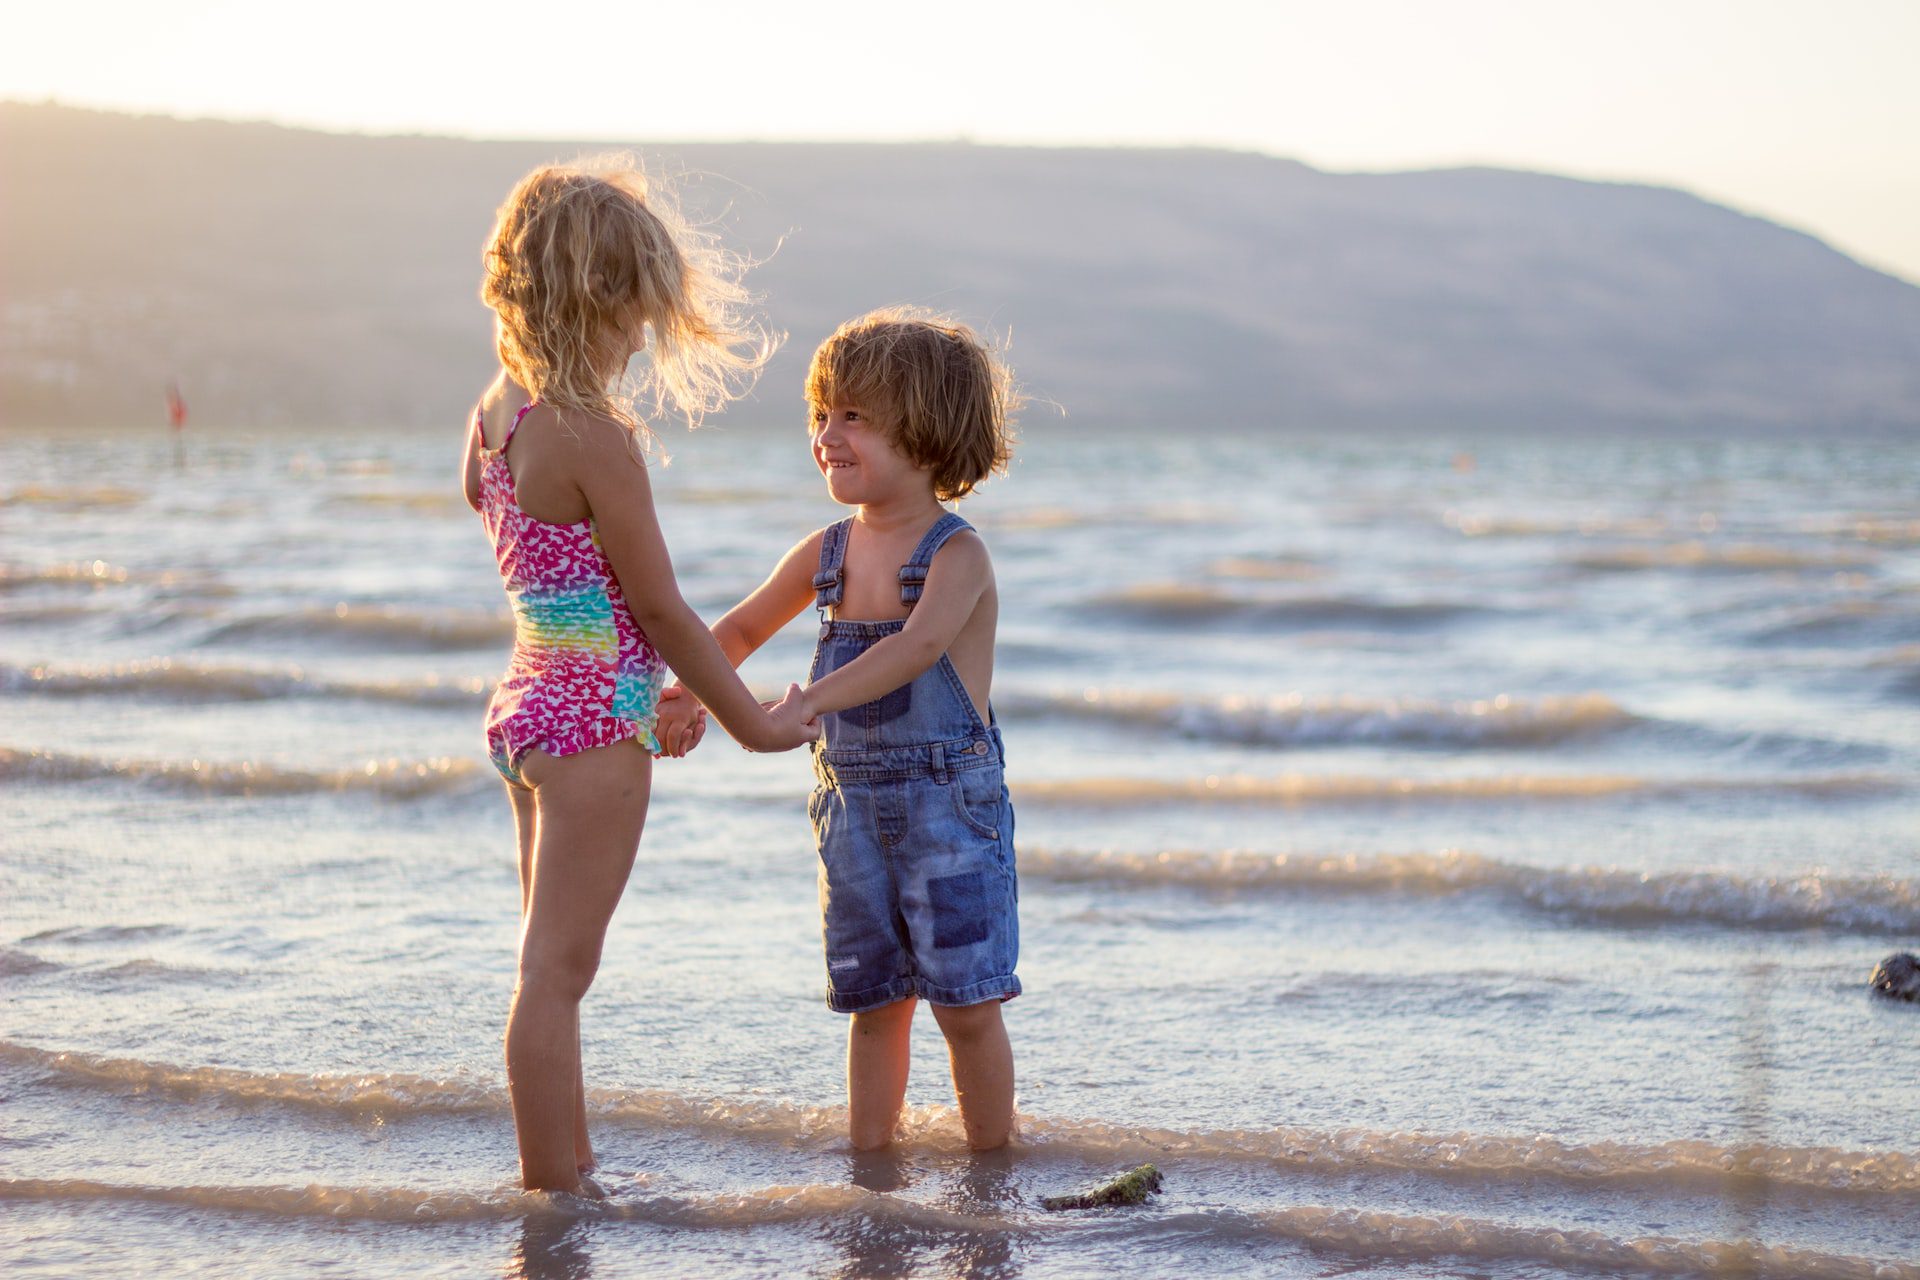 Two children standing on the beach holding hands